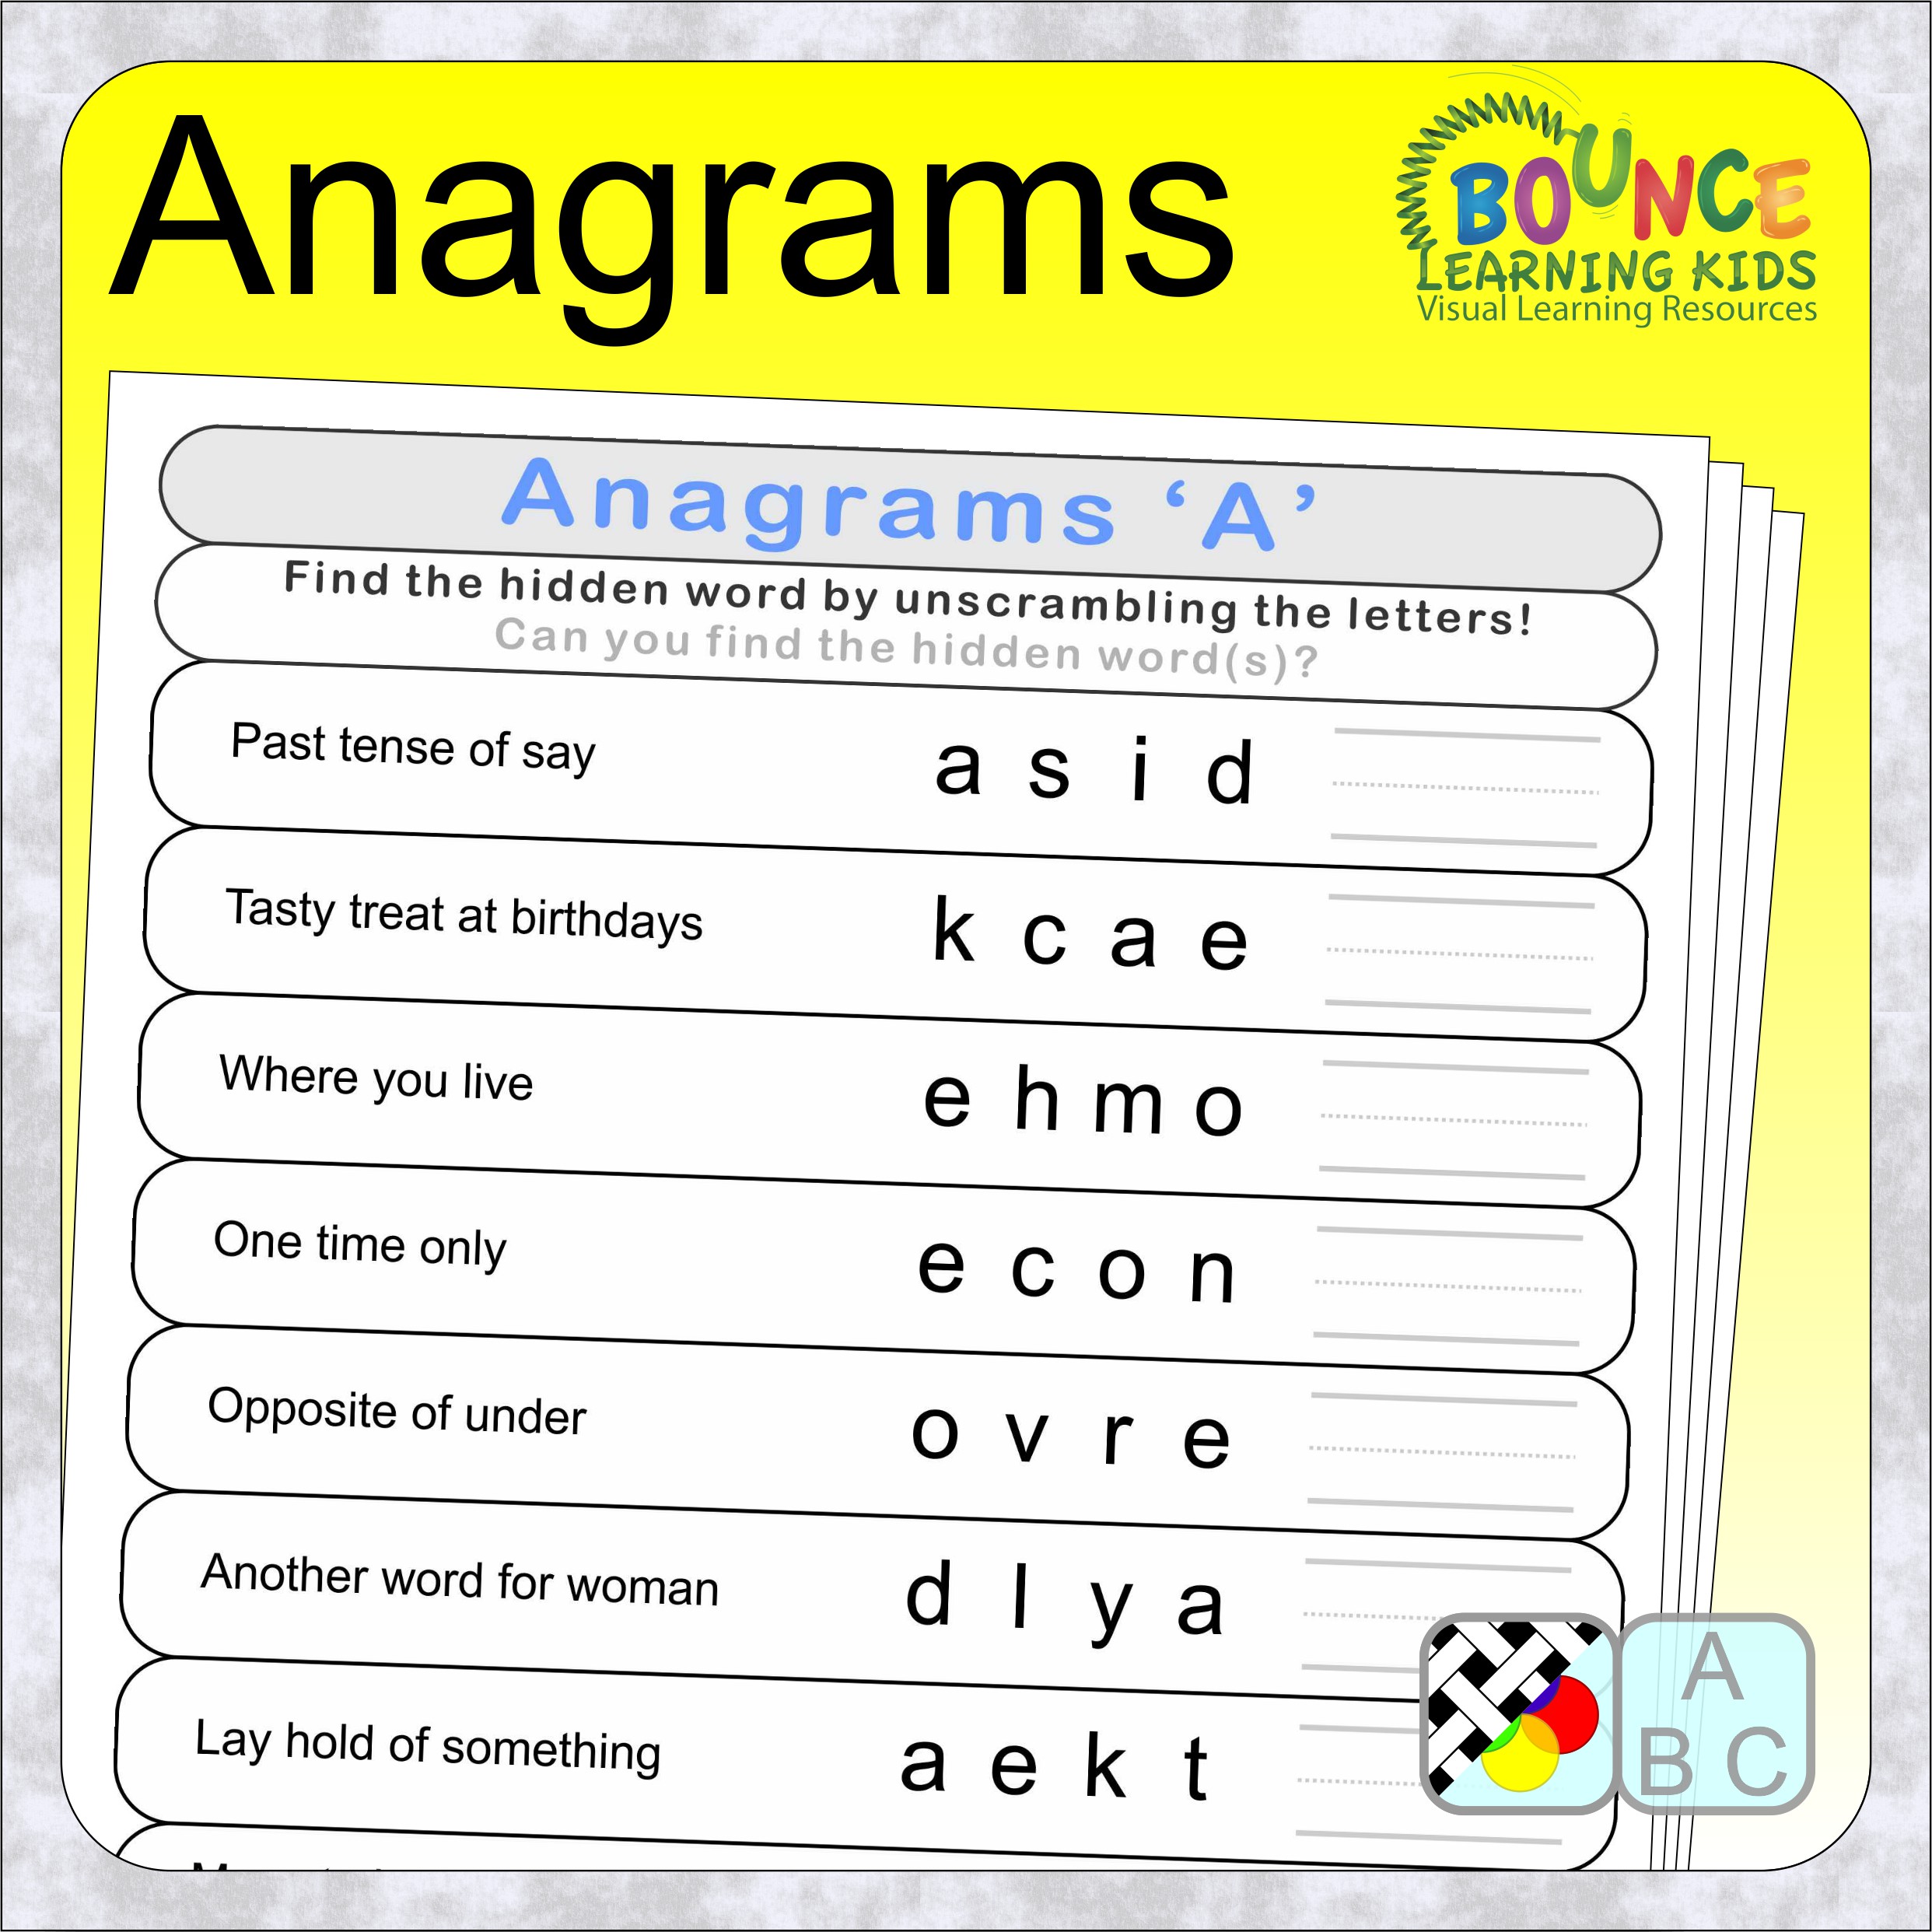 19-fun-anagrams-worksheets-to-download